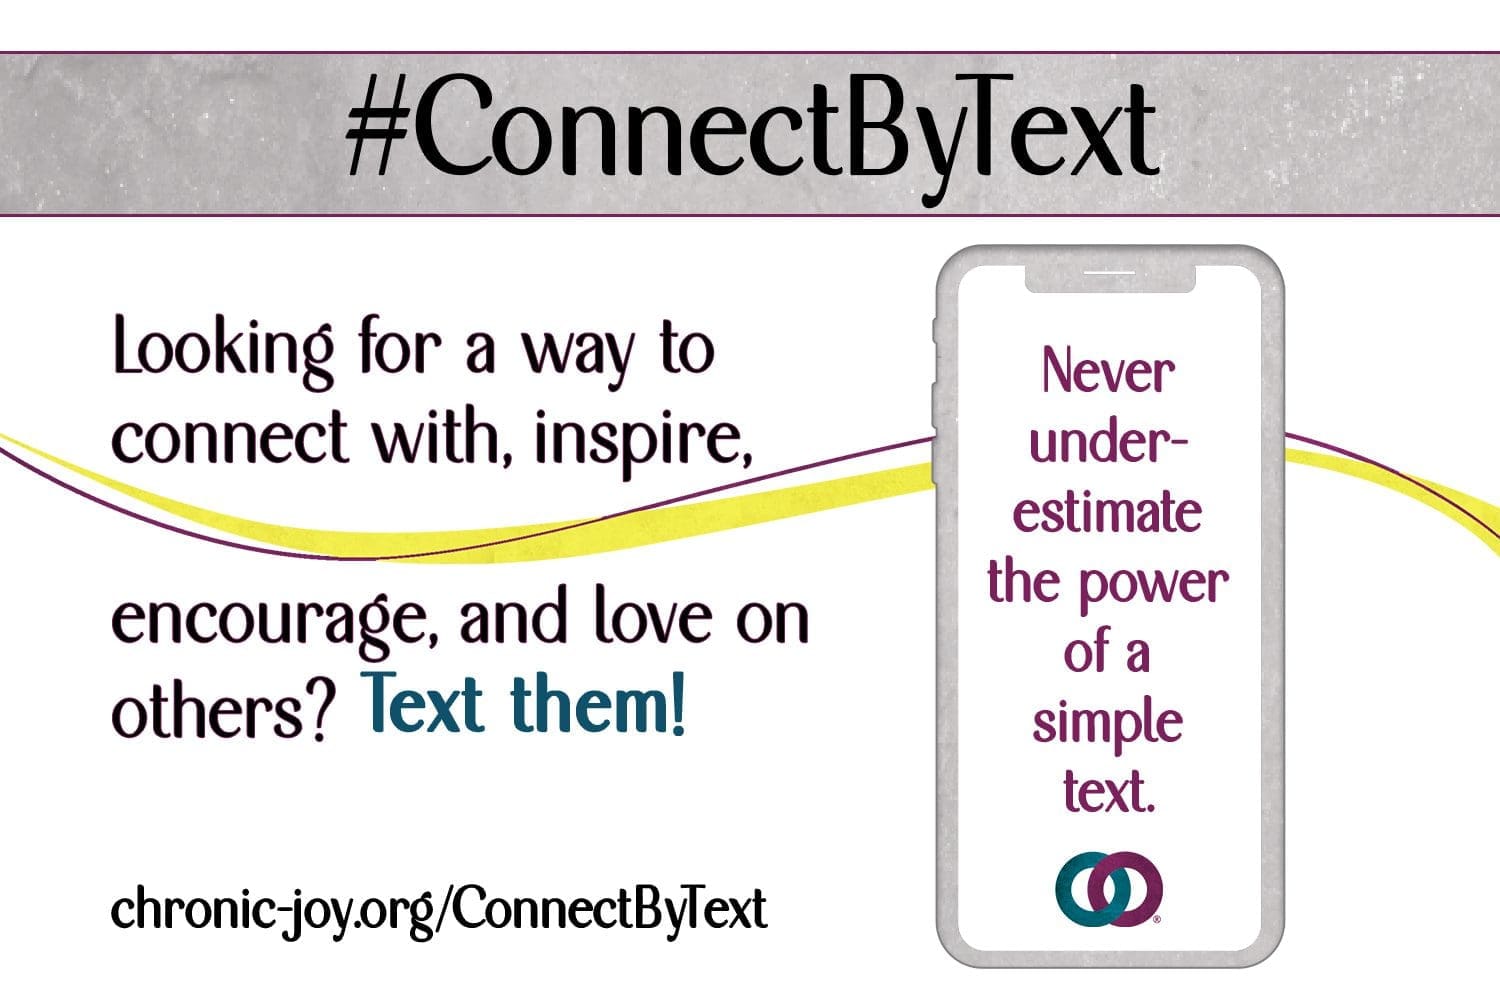 #ConnectByText - Looking for a way to connect with, inspire, encourage, and love on others? Text them! Never underestimate the power of a simple text.